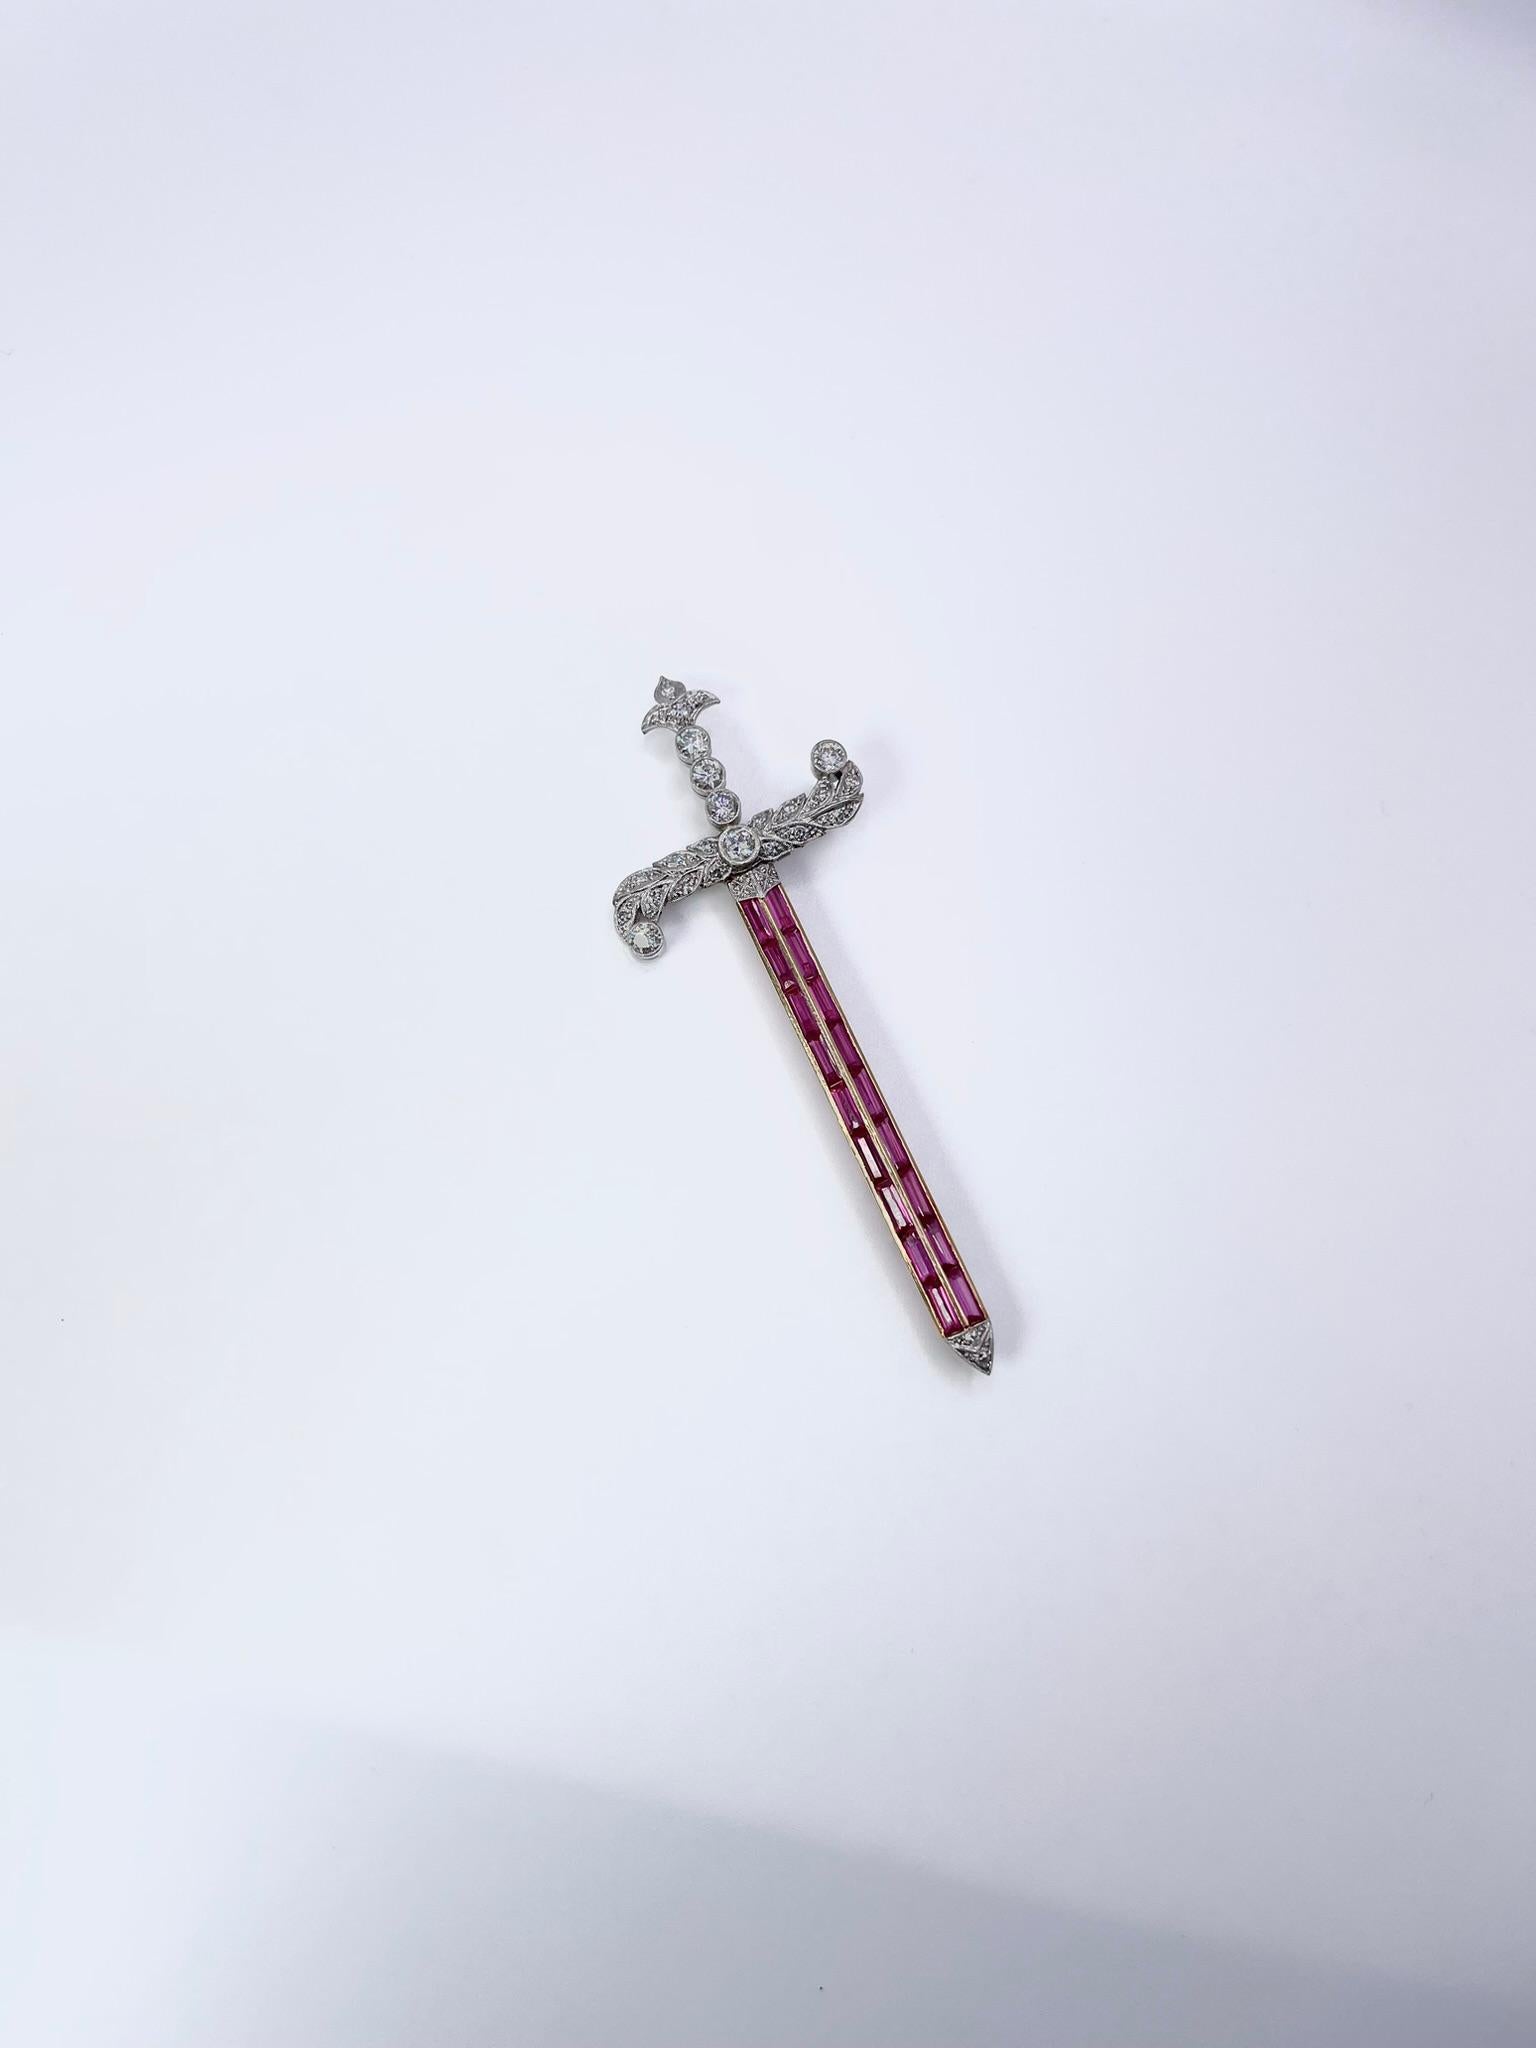 Rare sword made in platinum and 18KT gold with synthetic rubies and natural old diamonds. An artistic piece with excellent craftsmanship, year is uknown.
GRAM WEIGHT: 11.90gr
GOLD: 18KT yellow gold and platinum
SIZE: 2.5 inches long
NATURAL